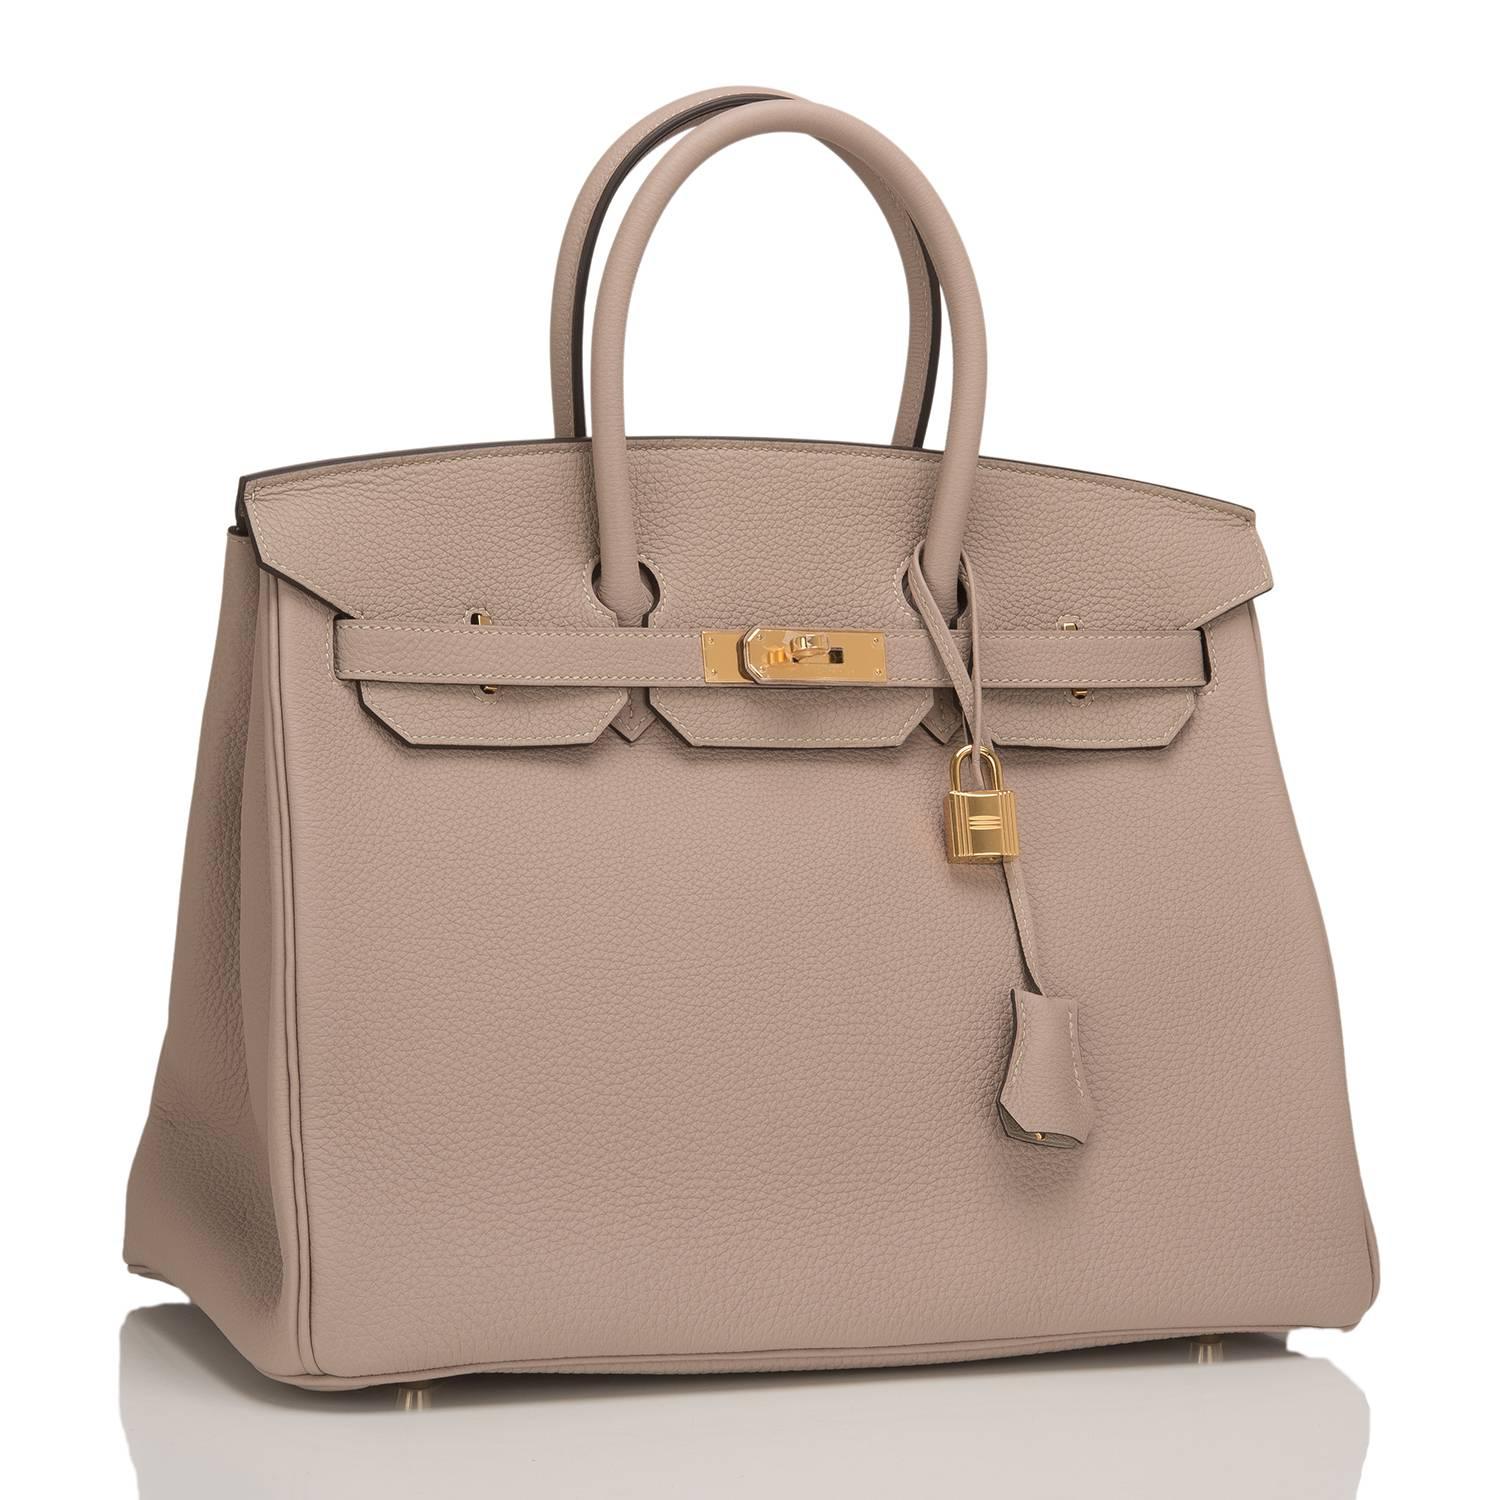  	
This Hermes Gris Tourterelle Birkin 35cm in togo leather with gold hardware.

This Birkin features tonal stitching, front toggle closure, clochette with lock and two keys, and double rolled handles.

The interior is lined in Gris Tourterelle